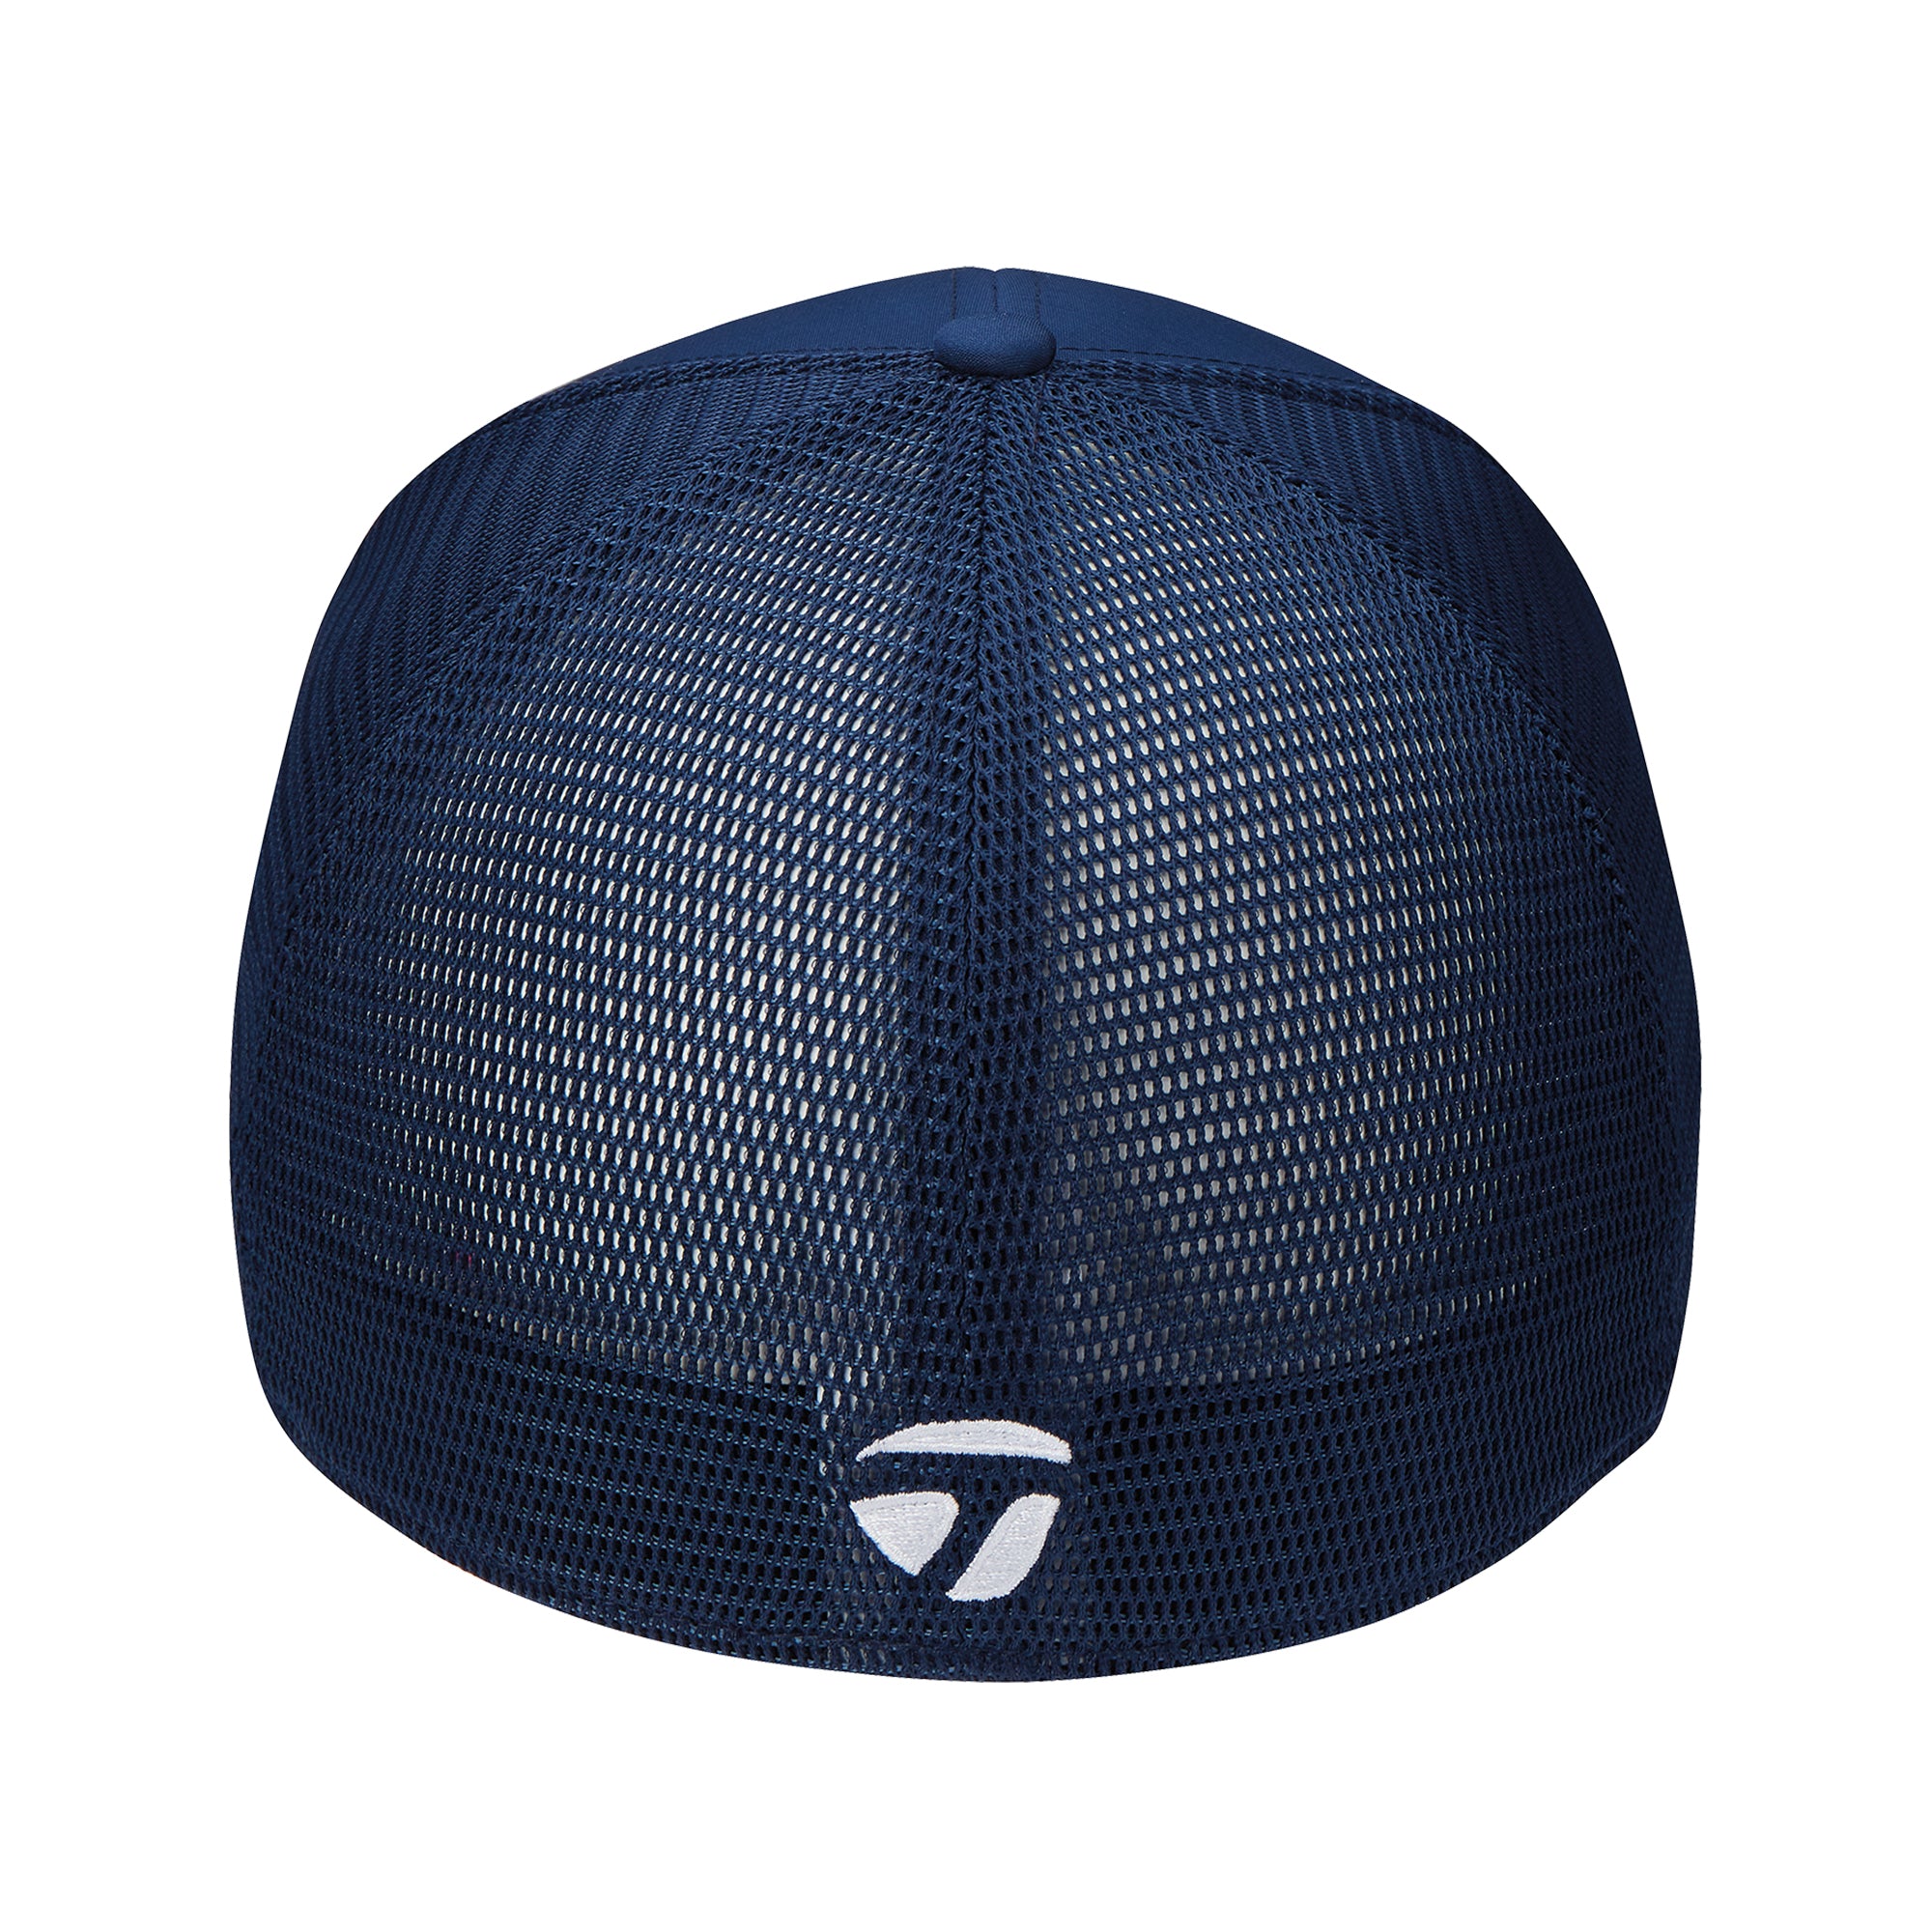 TaylorMade Golf Cage Cap